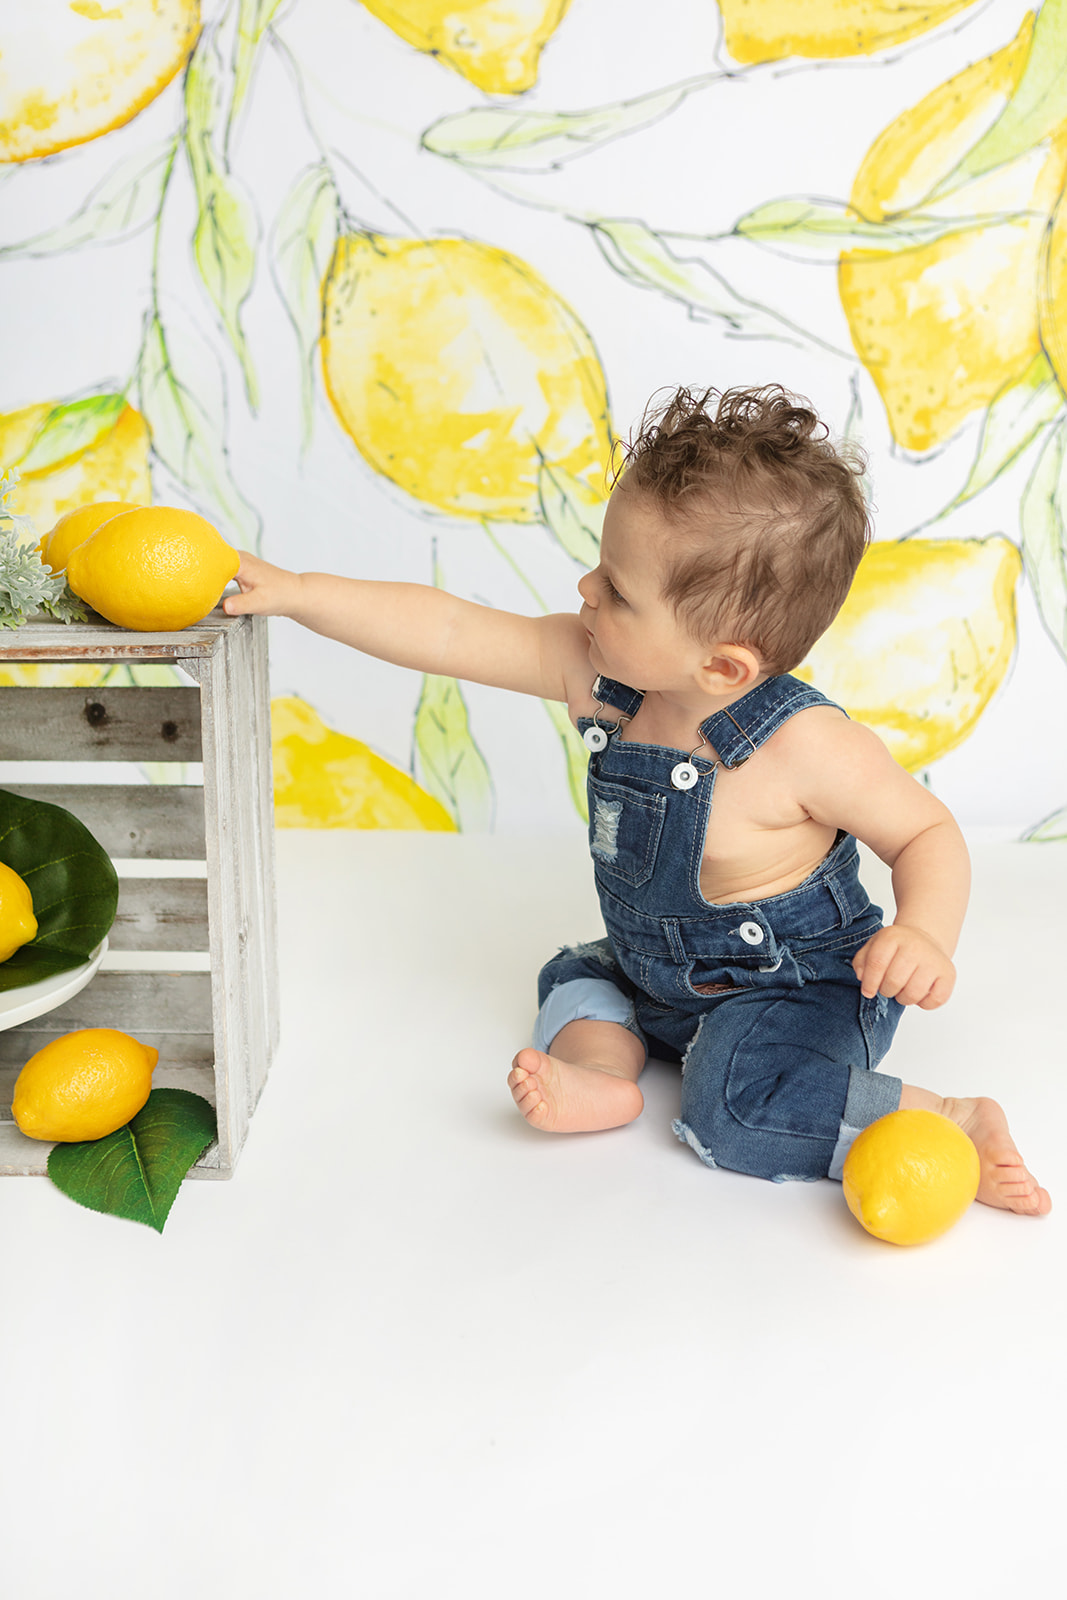 A sitting, one year-old little boy wearing denim overalls, reaches for a lemon prop during his lemon themed first birthday cake smash session with Karen Kahn, of Looking Up Photography.